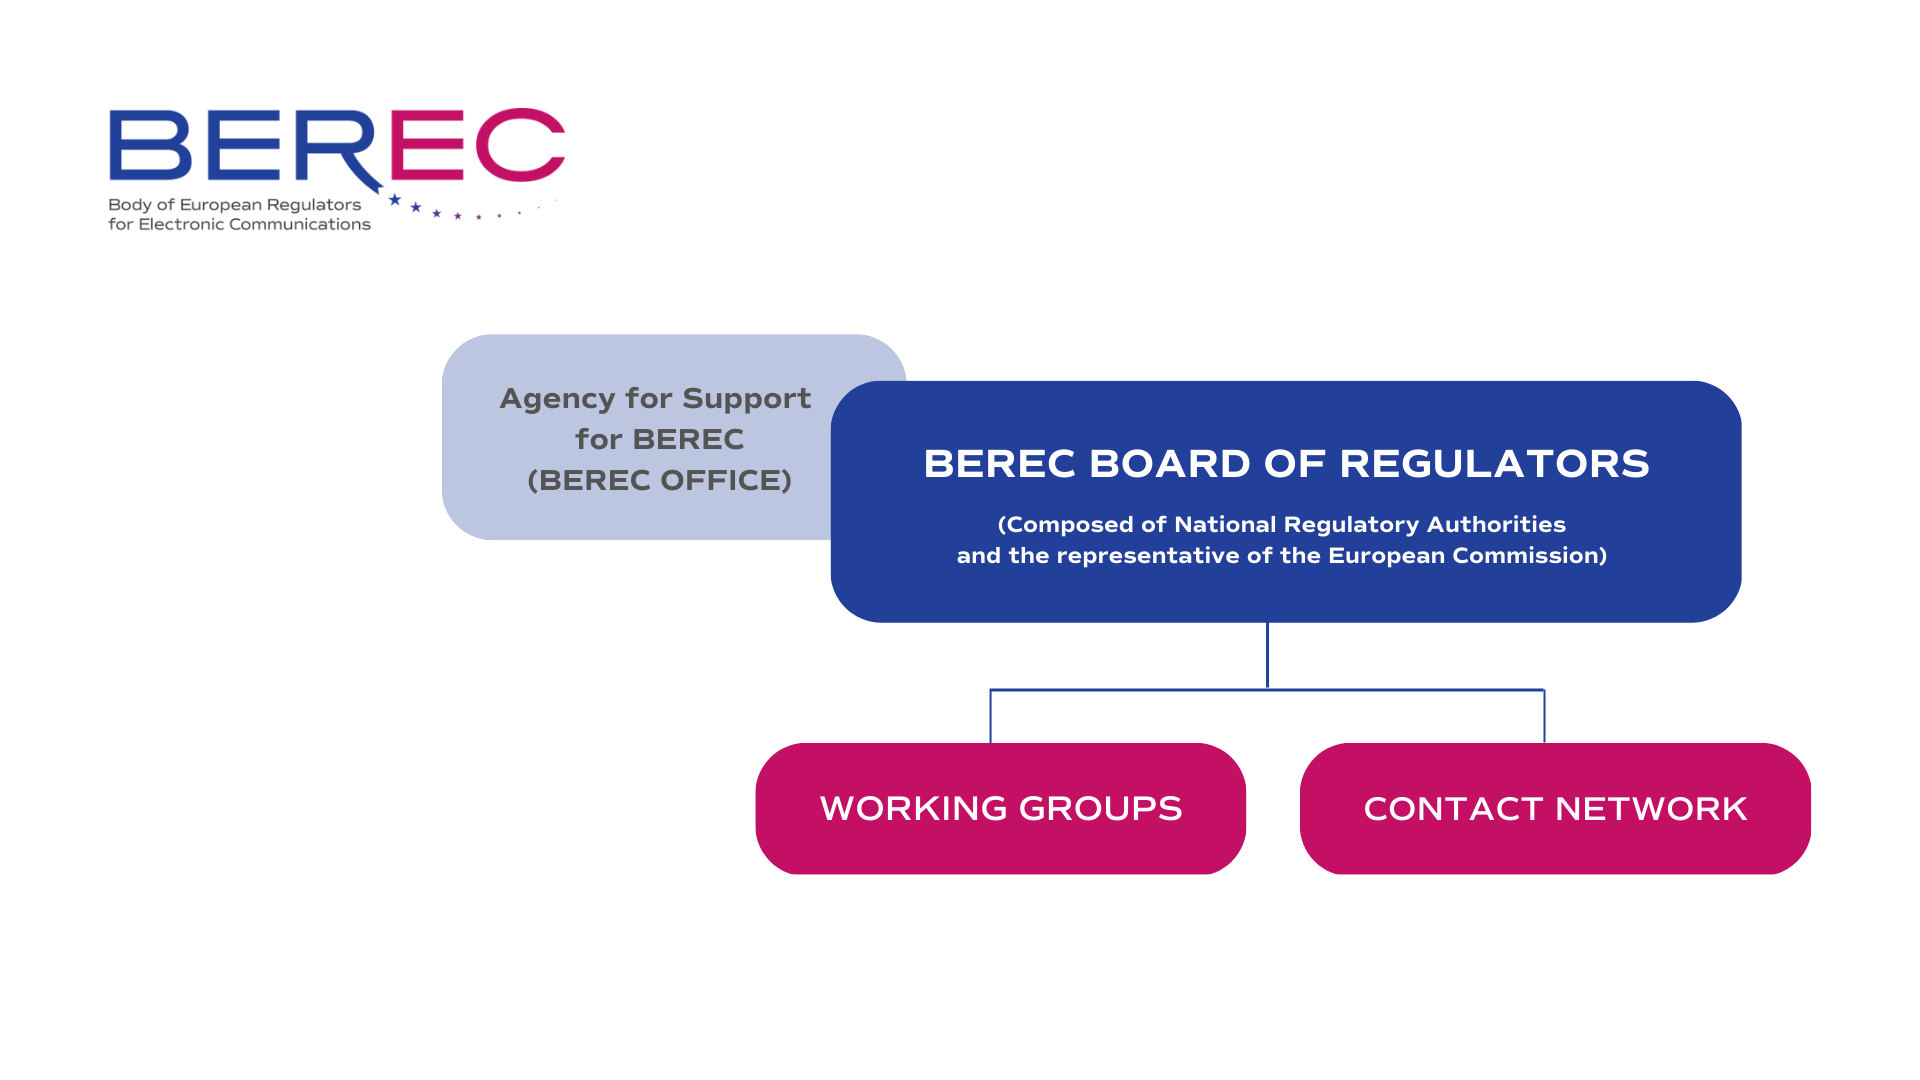 The image shows the BEREC Organisational Chart, also described in the text below